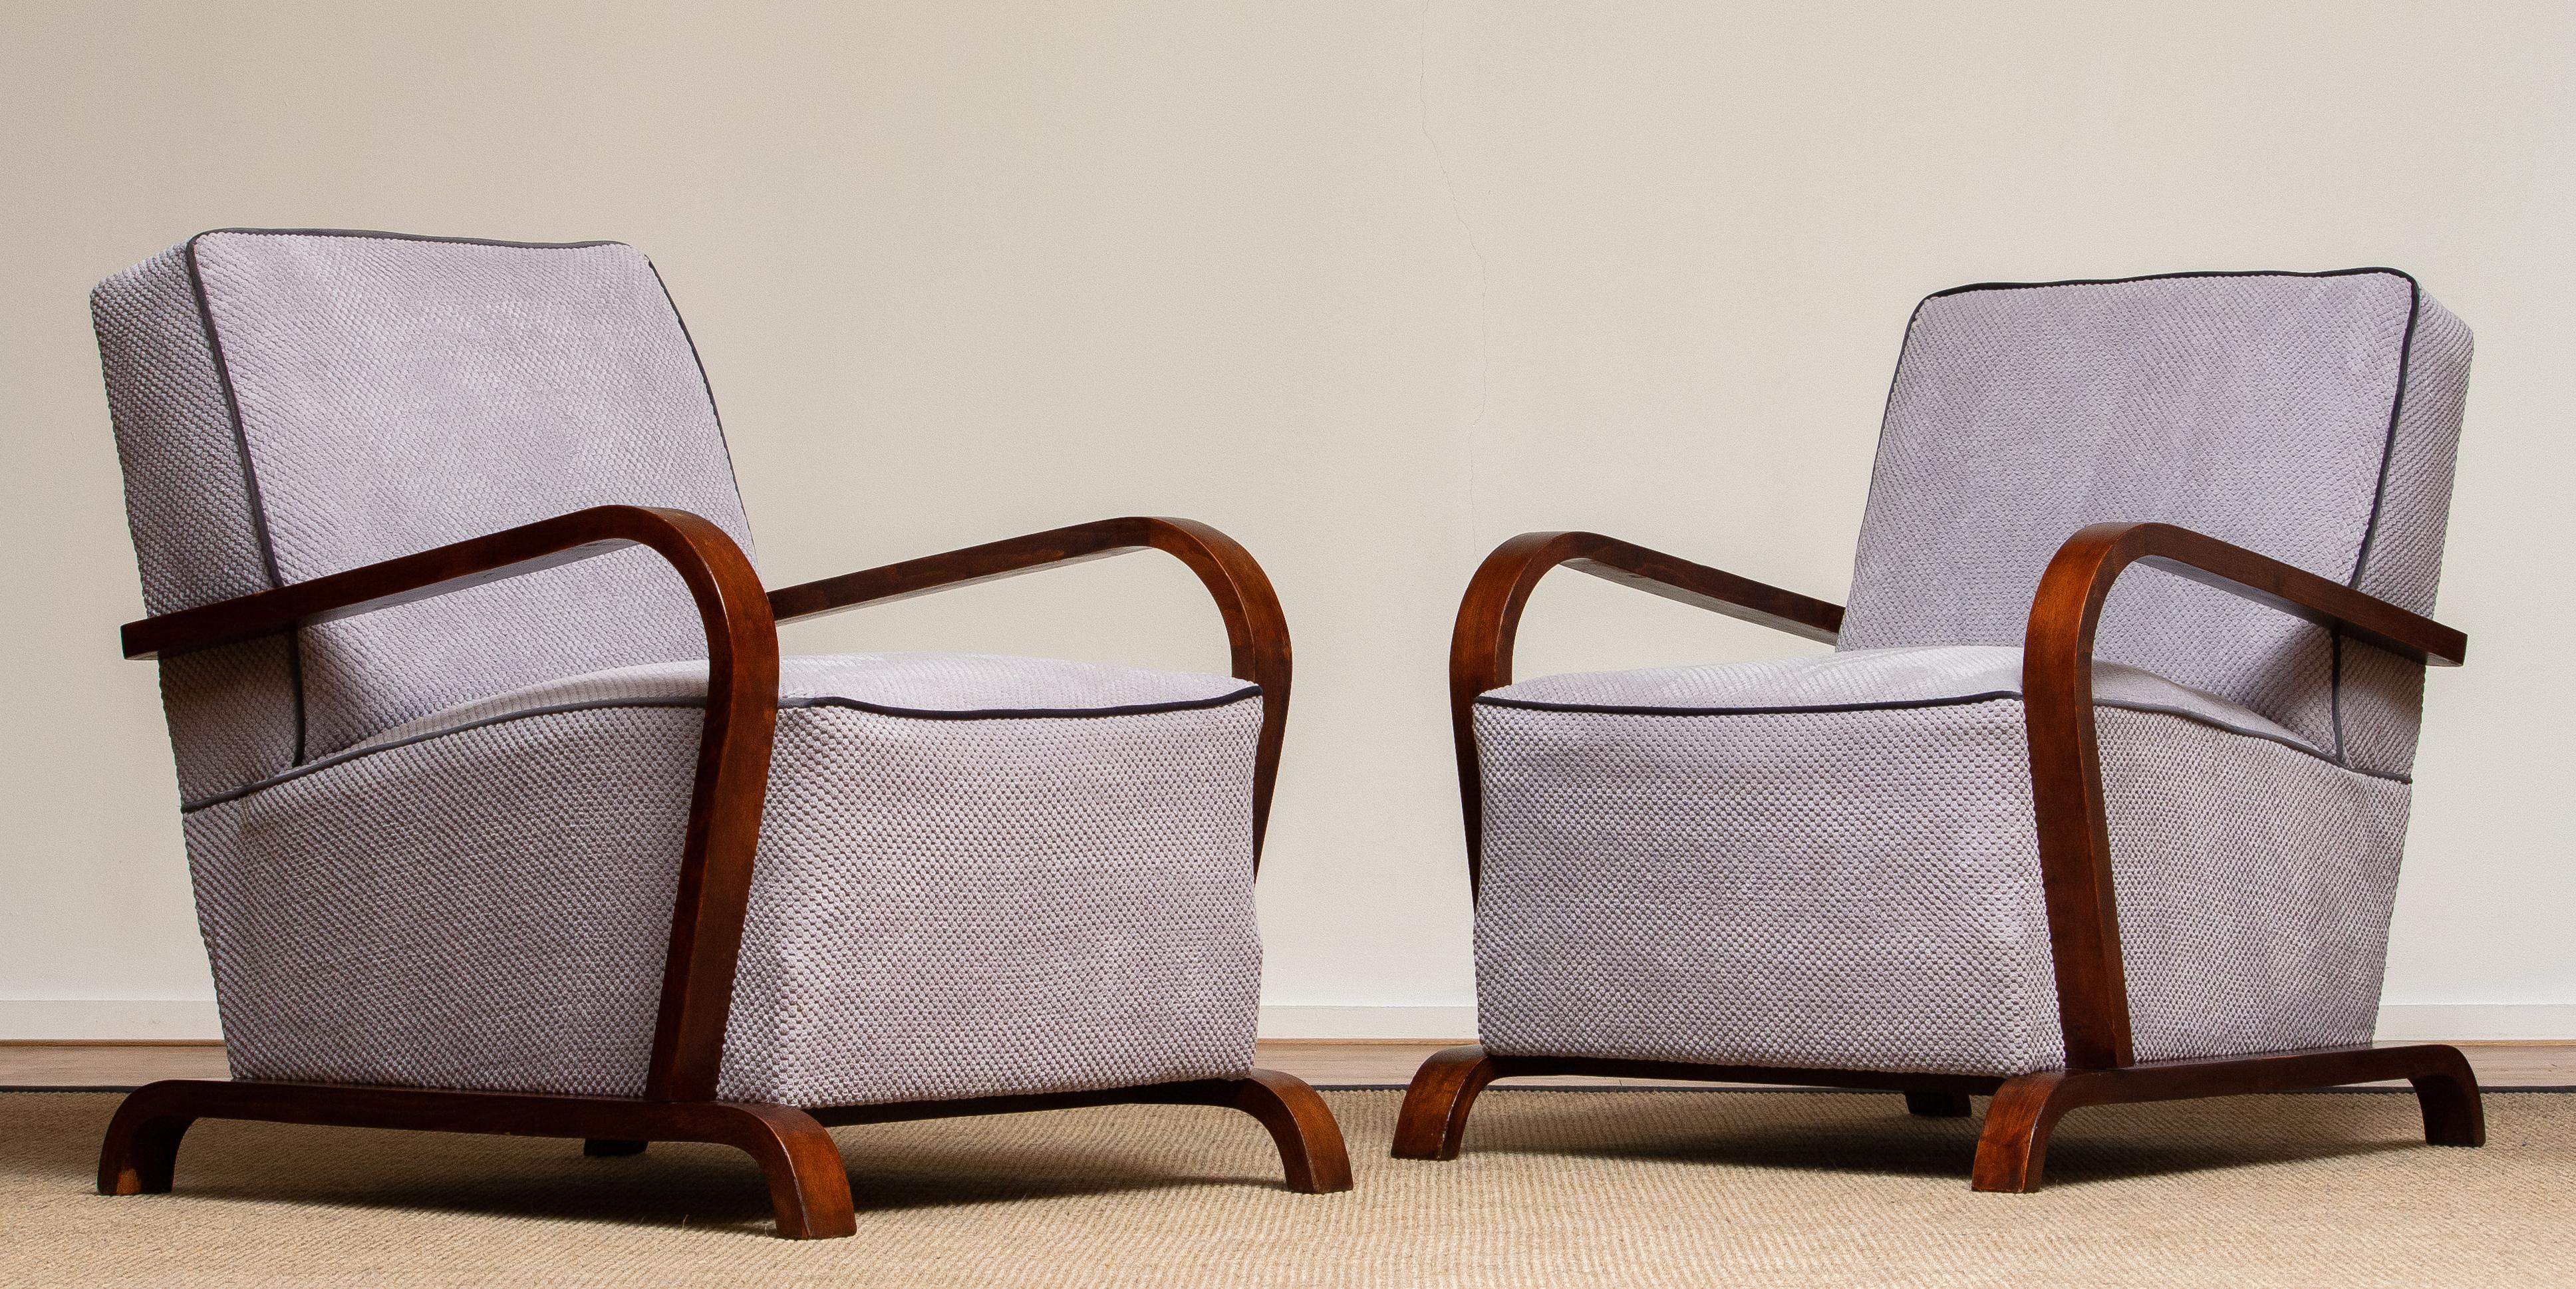 1920s, Pair of Scandinavian Art Deco Armchair / Lounge / Club Chairs from Sweden 1